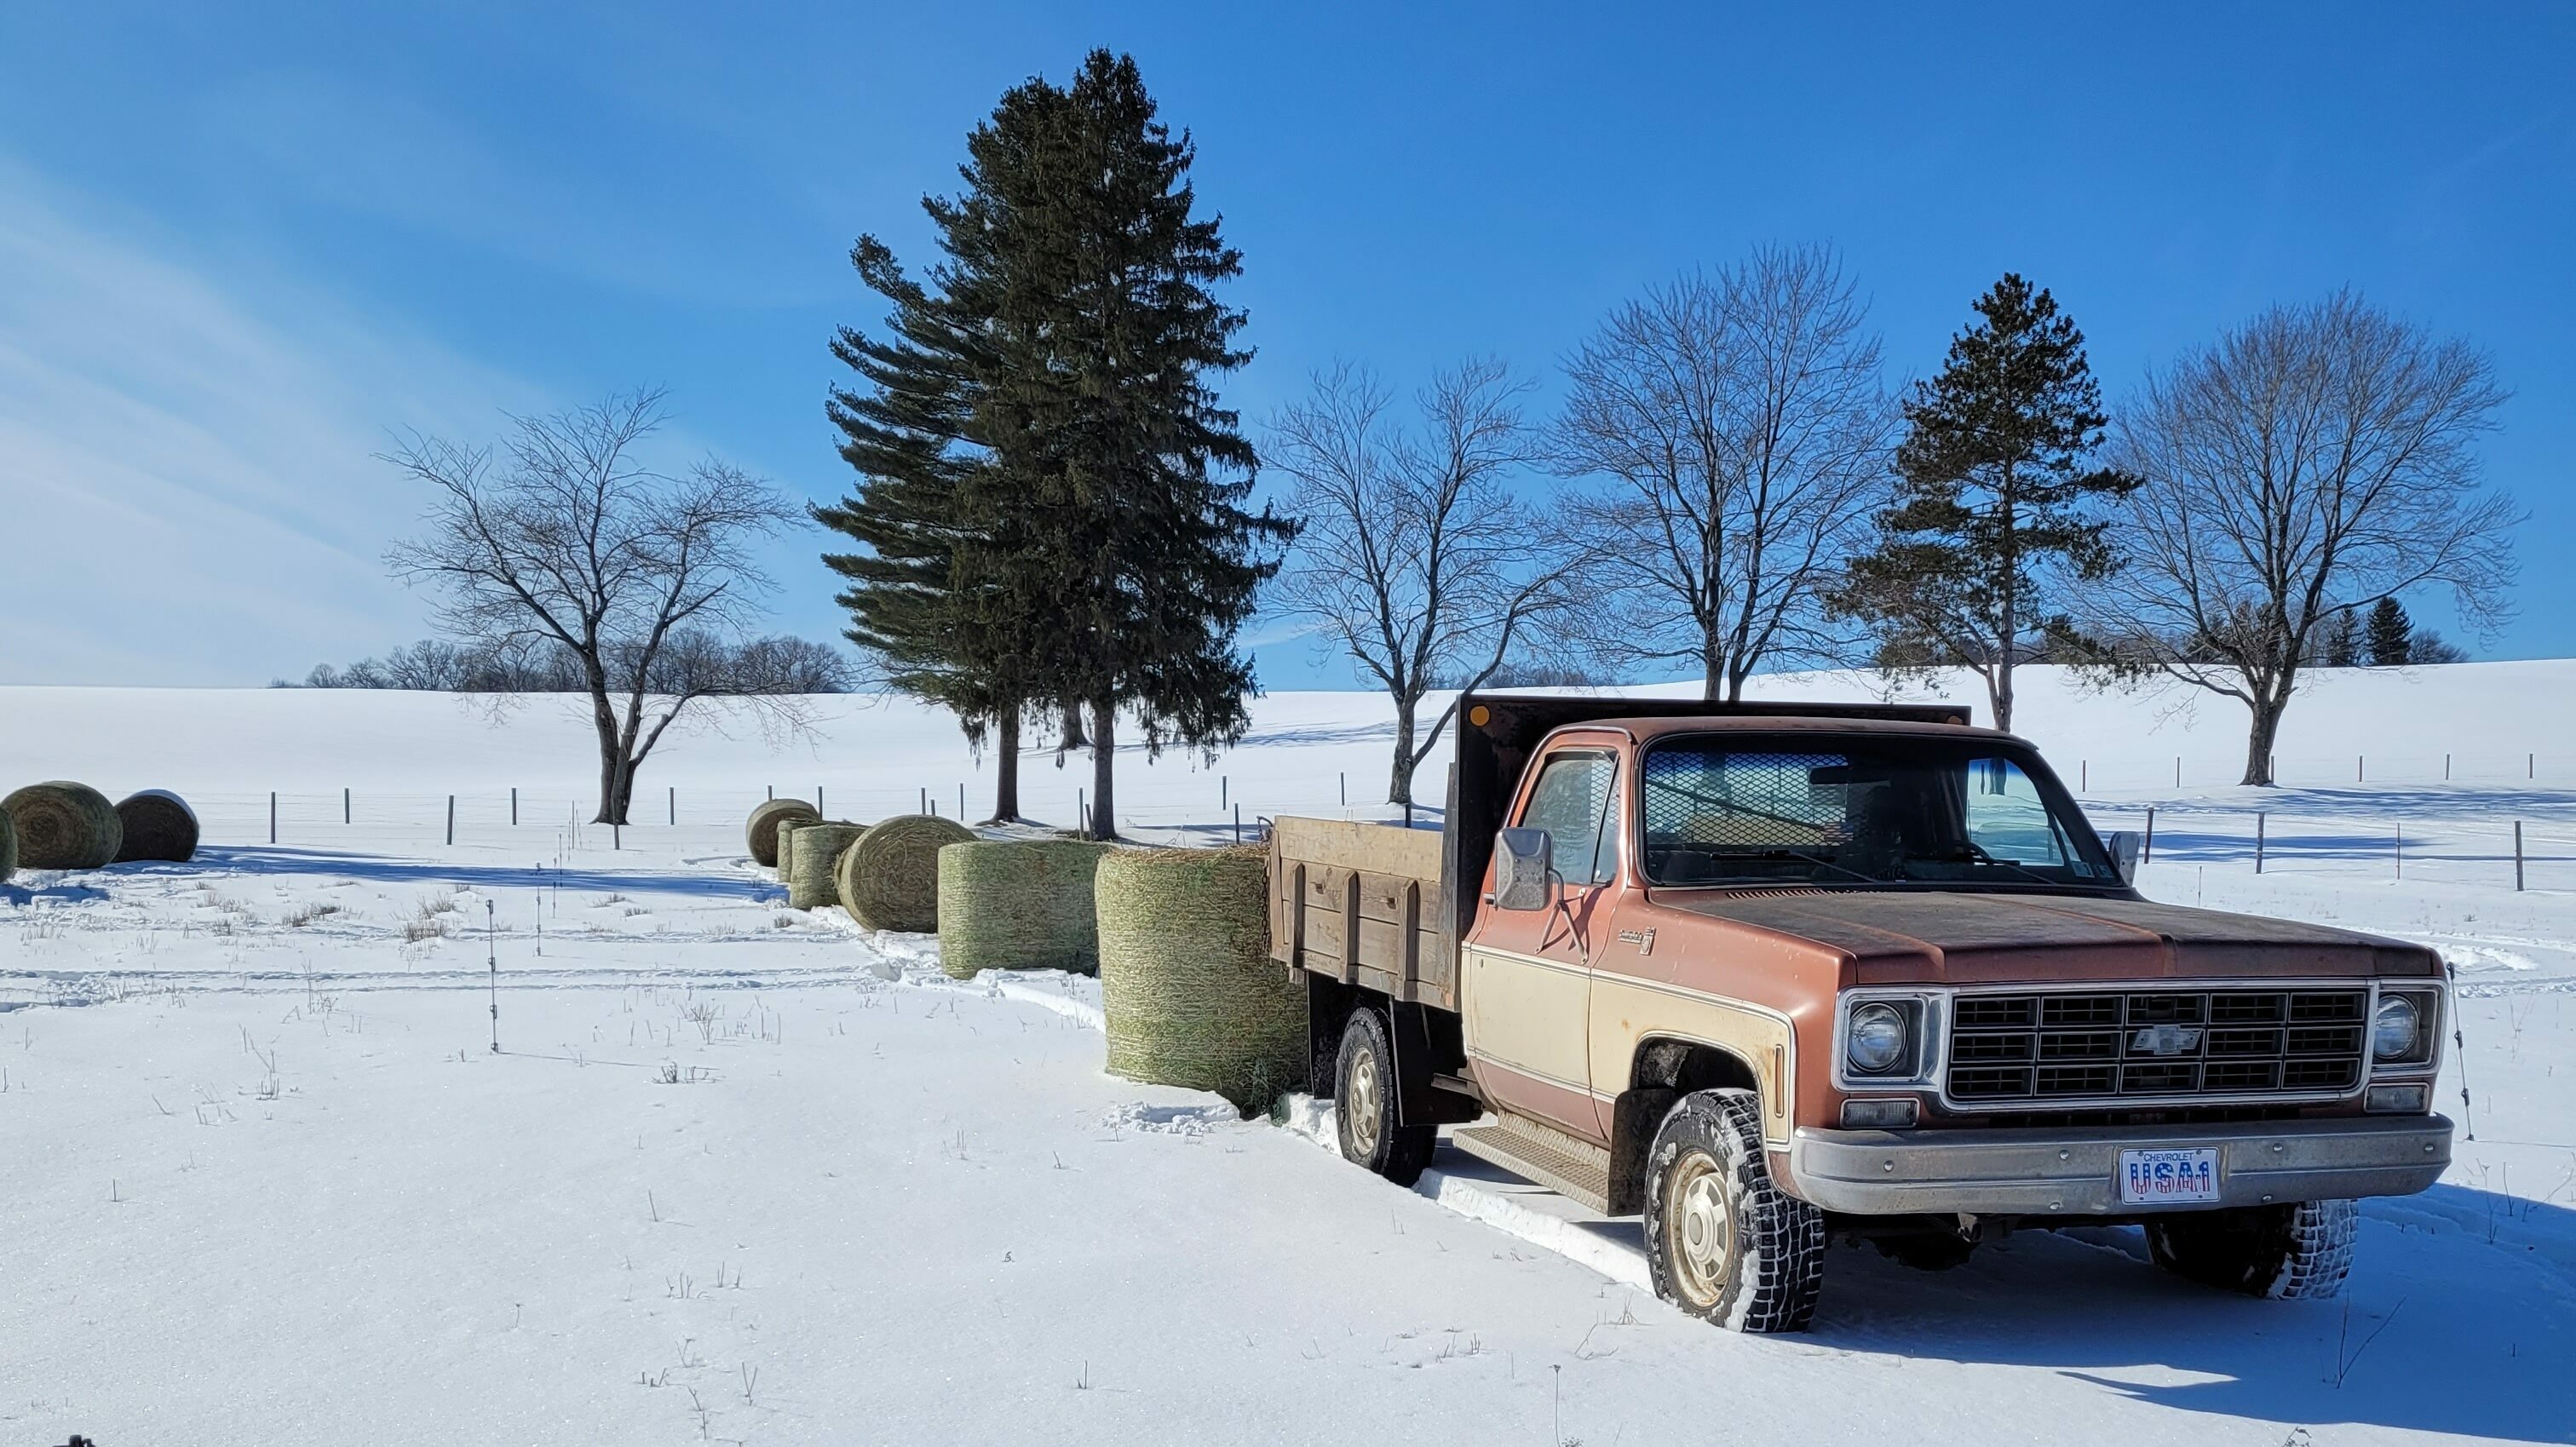 Truck in snowy field with bales